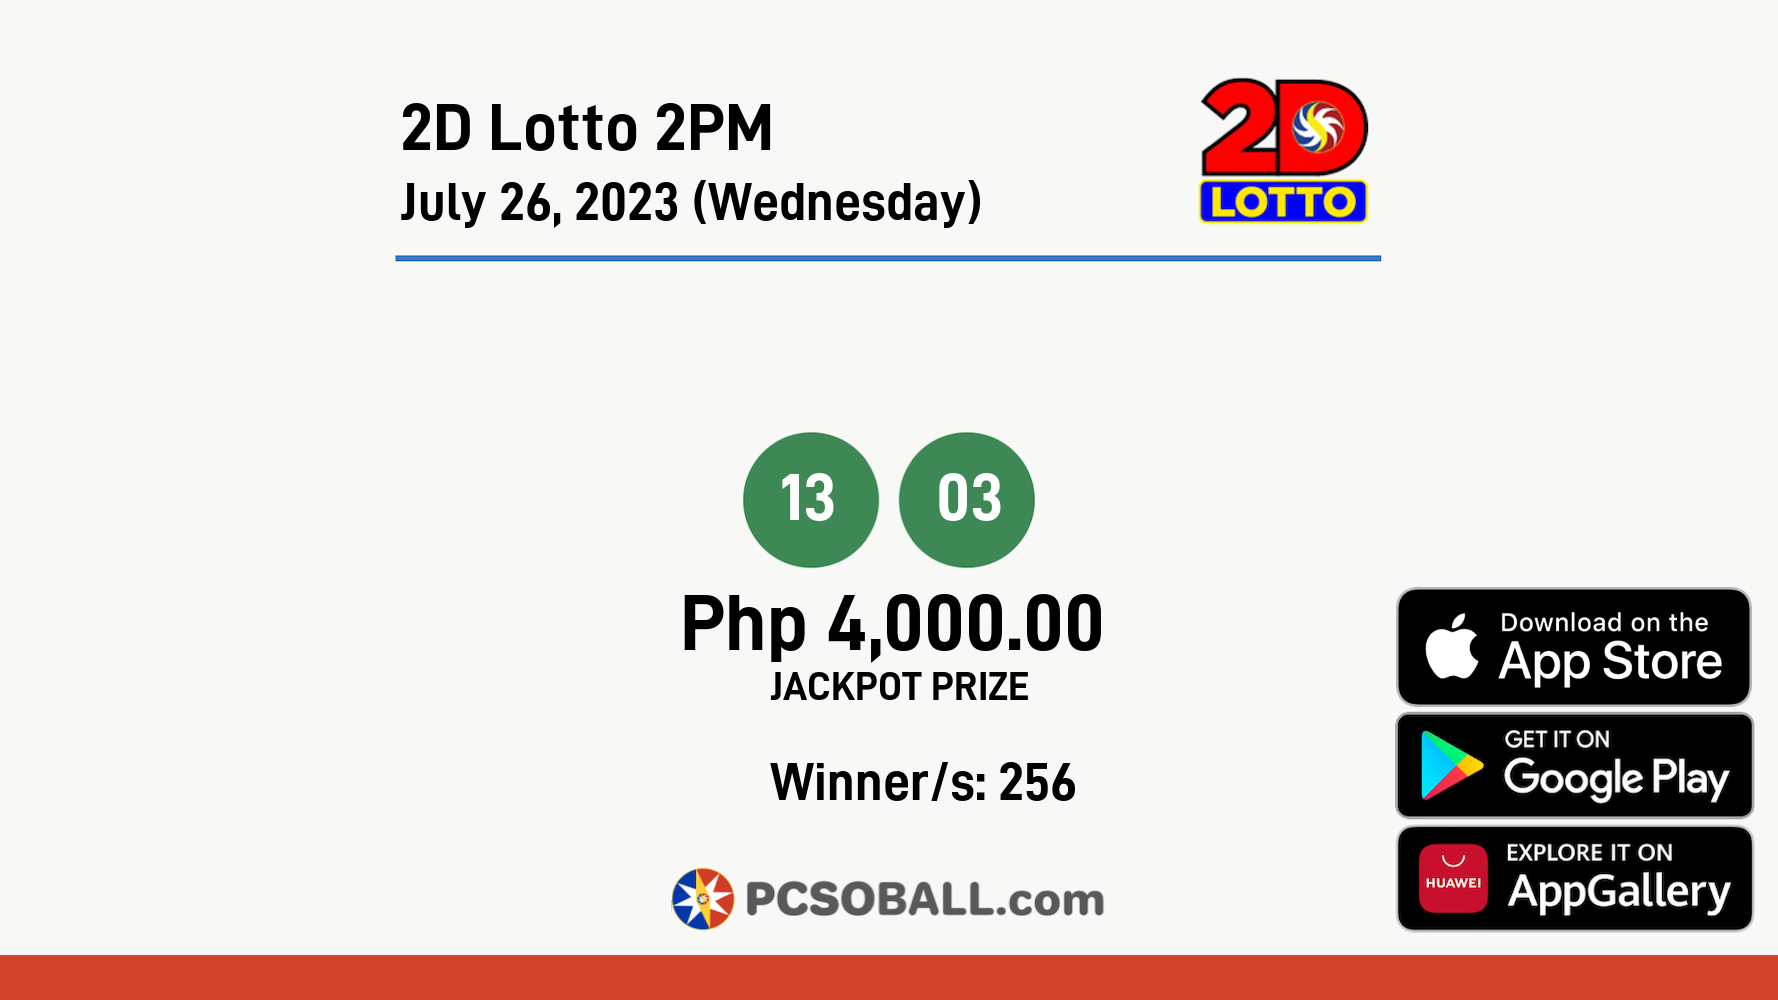 2D Lotto 2PM July 26, 2023 (Wednesday) Result